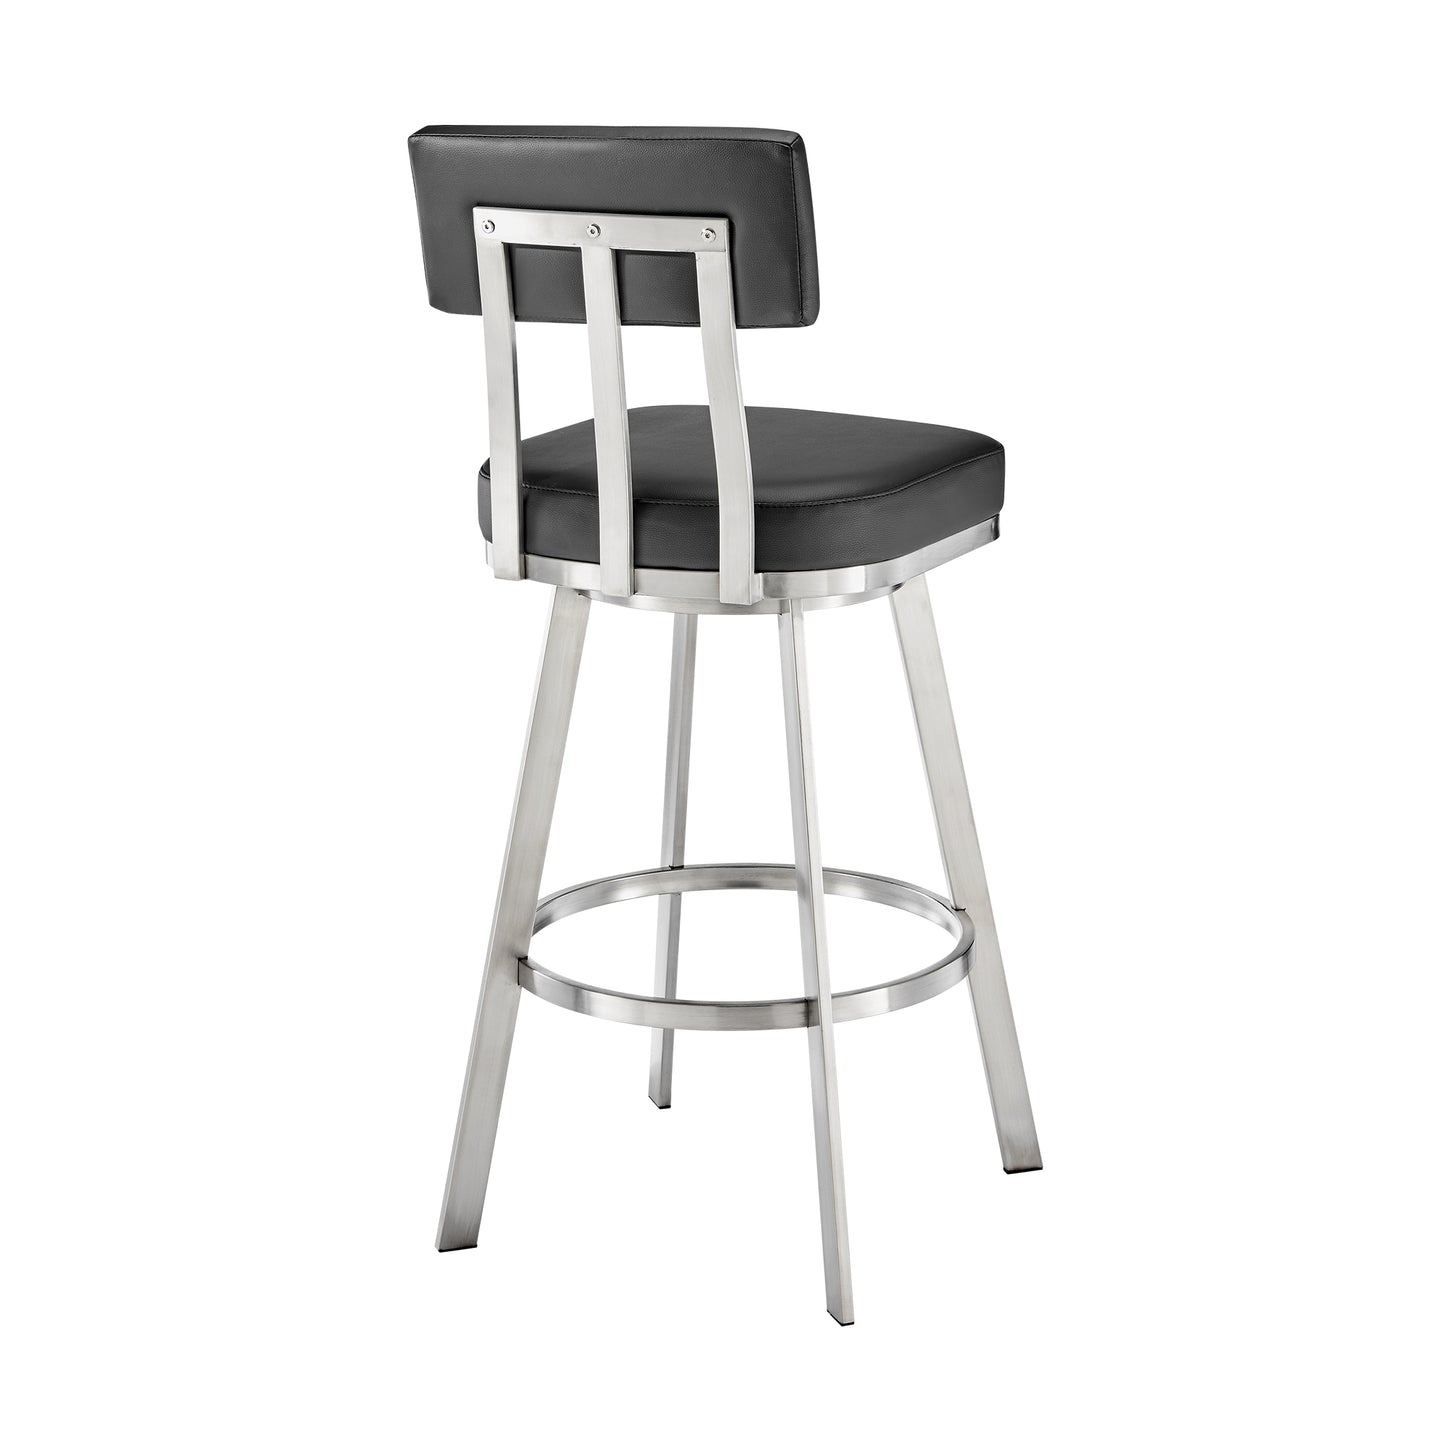 Benjamin 26" Swivel Counter Stool in Brushed Stainless Steel with Black Faux Leather